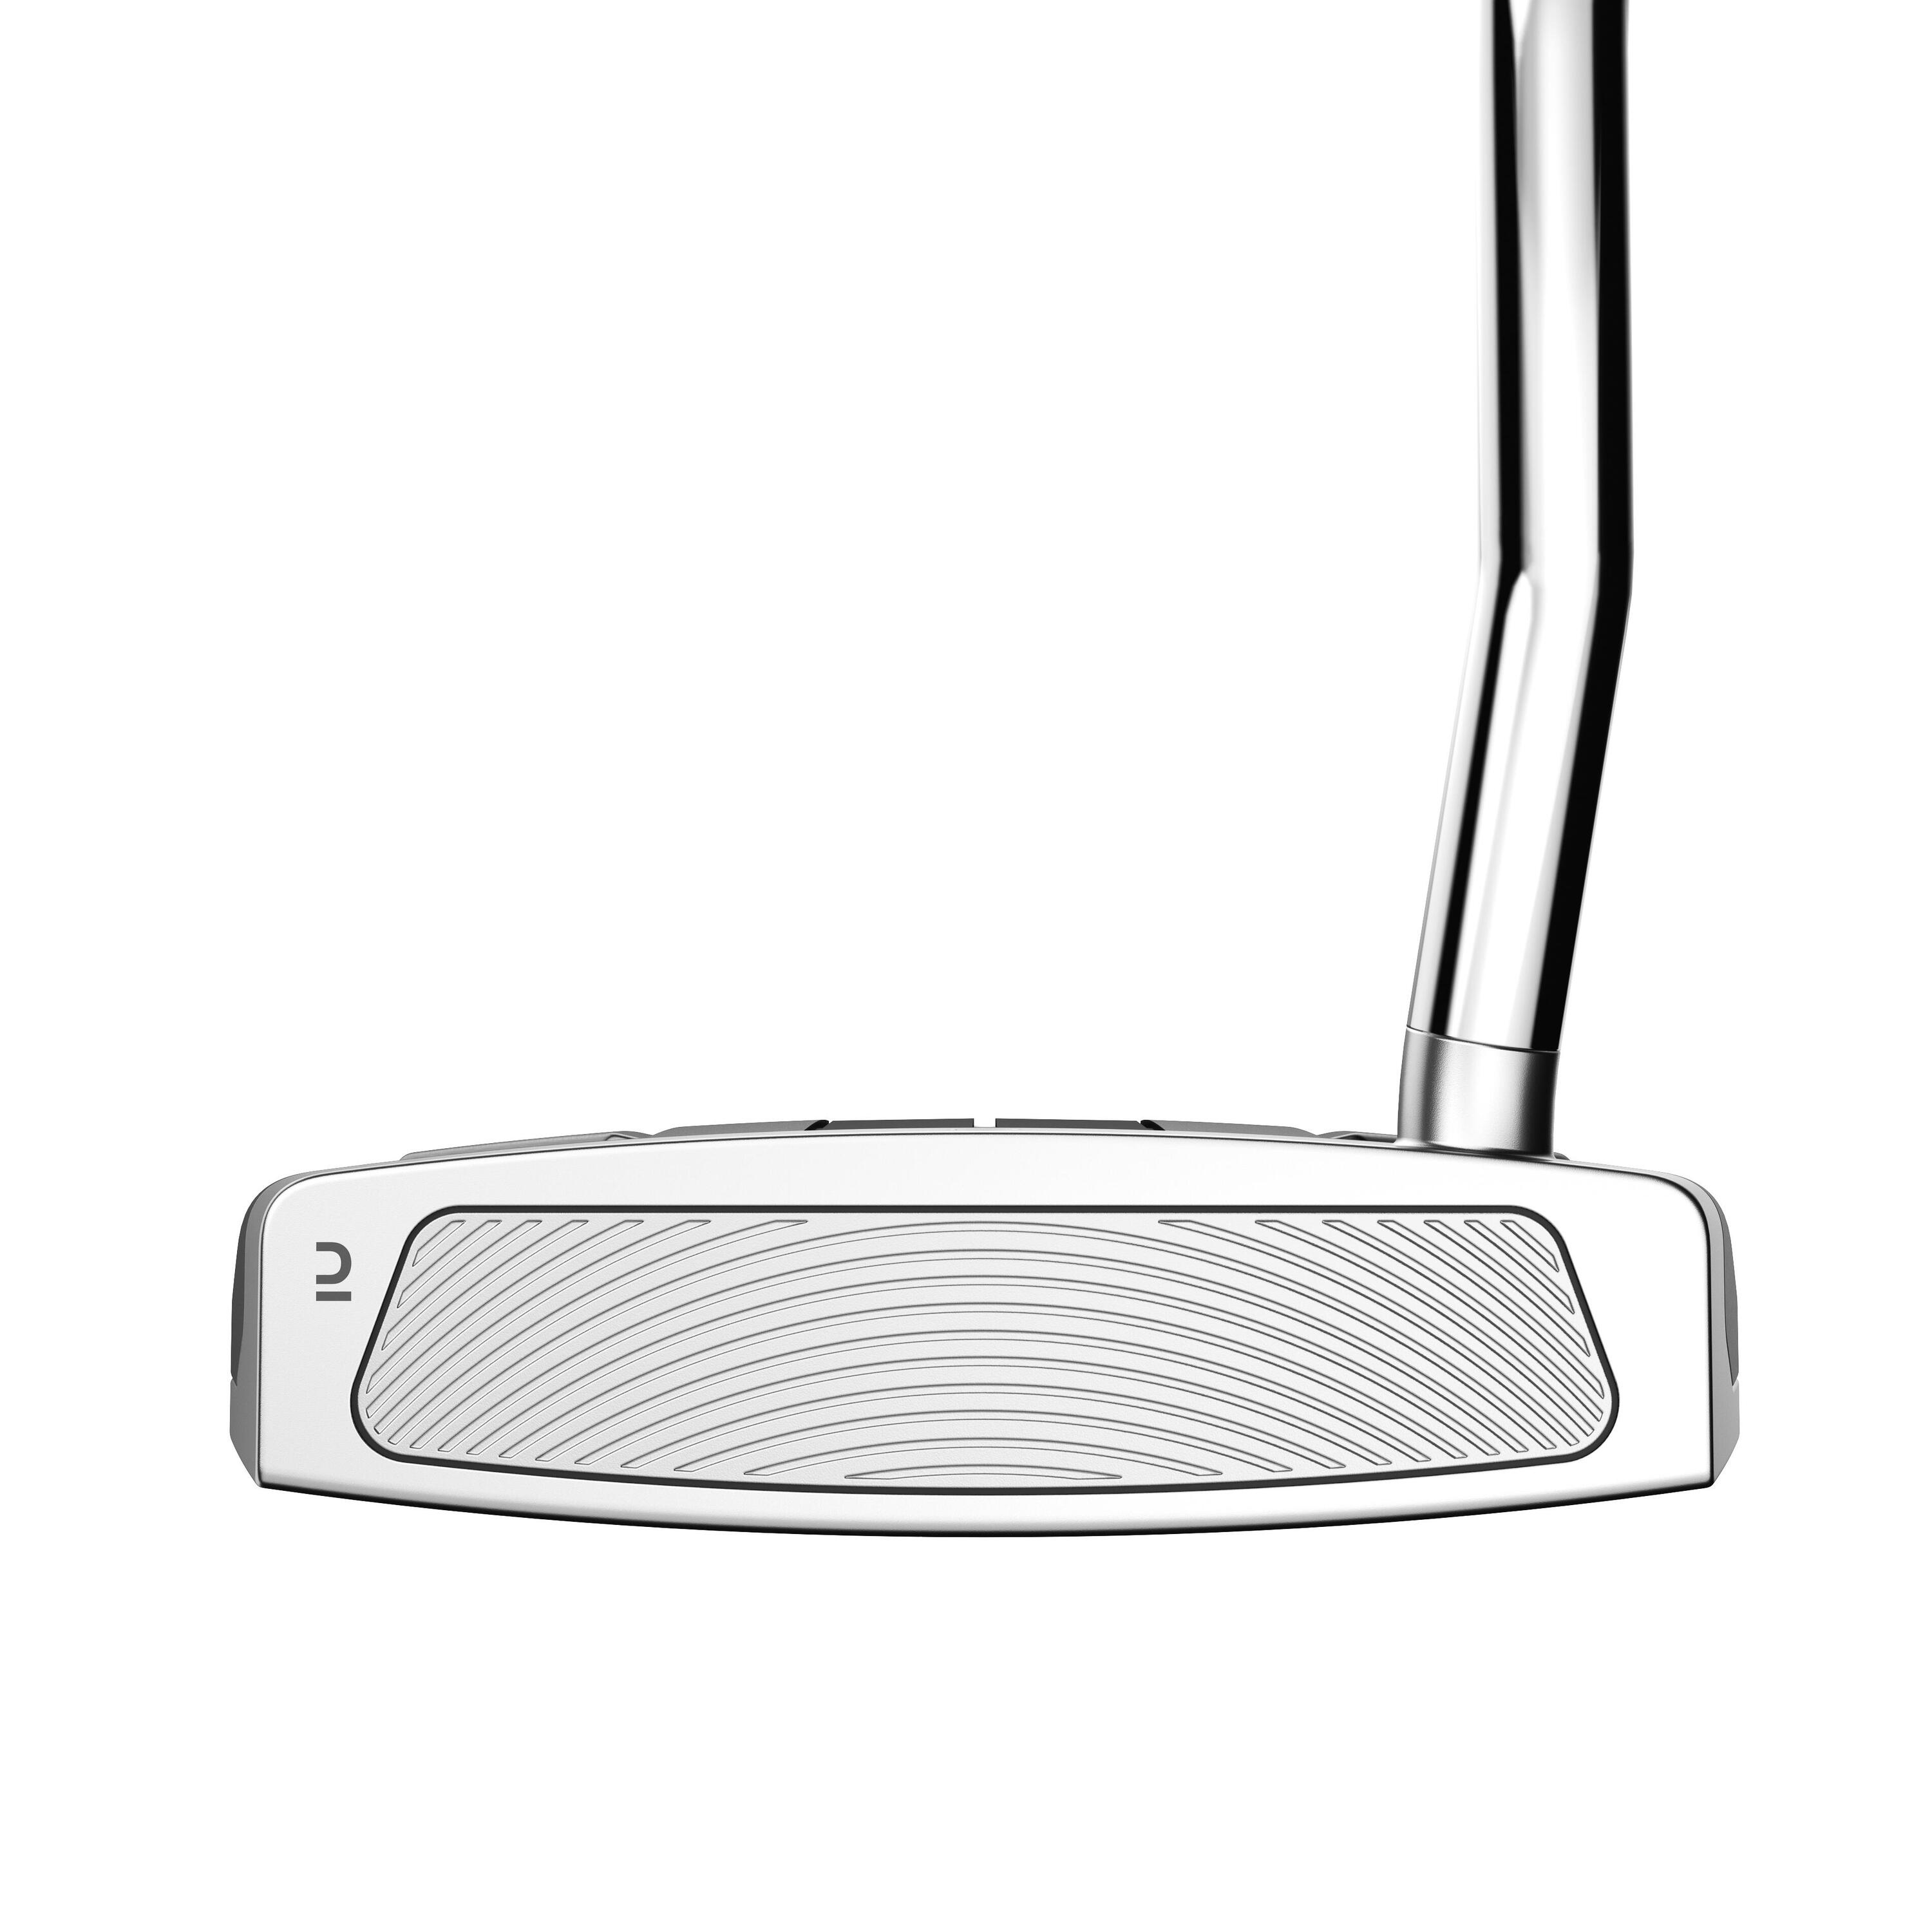 Golf putter face balanced right handed - INESIS High MOI 4/9